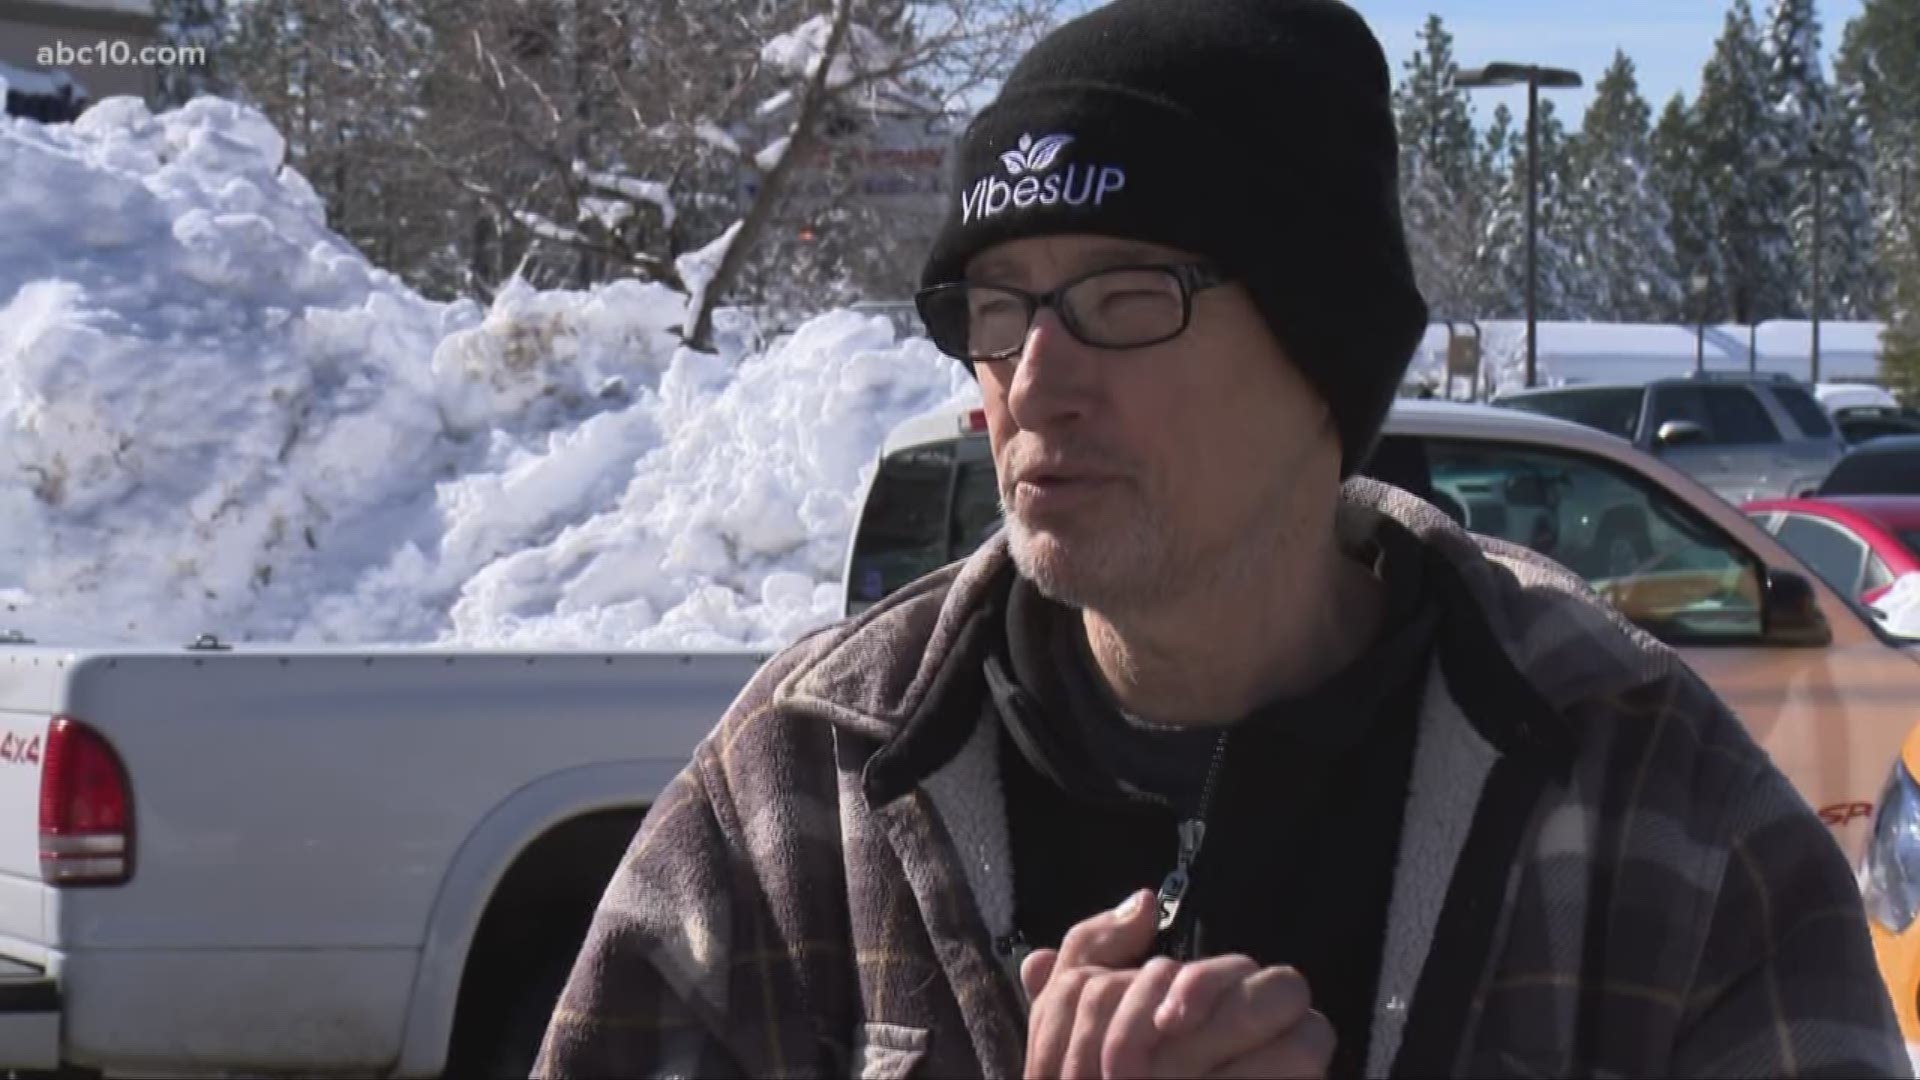 Scott Brown and his wife have been without power for three days. He told ABC10 it was exciting to see so much snow in his neighborhood after the first storm. "We took pictures for the first few days of icicles and trees, and now it’s like, go away!"